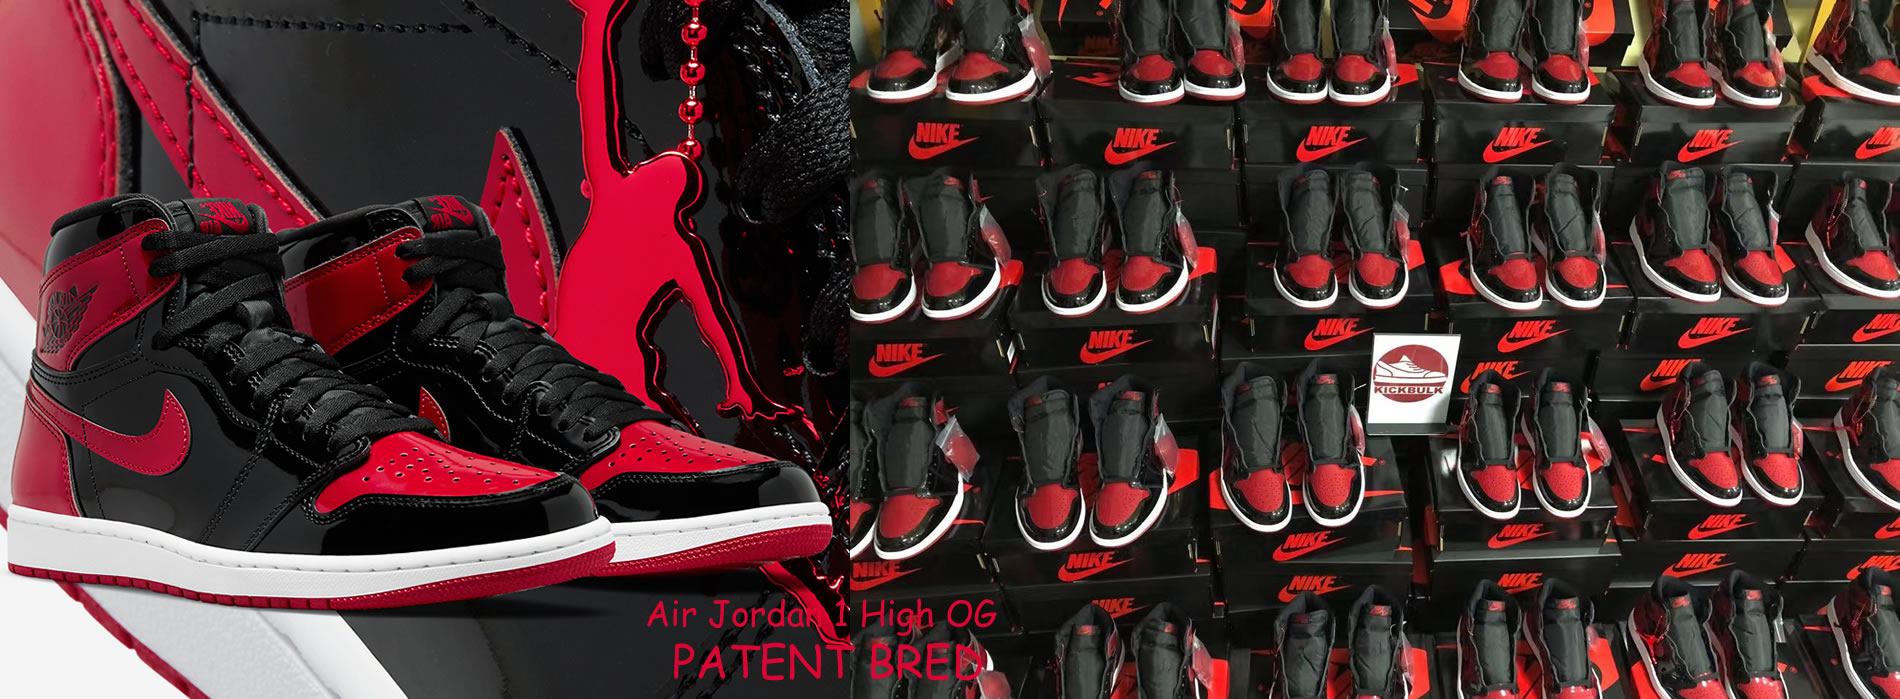 adidas site philippines contact information system RETRO HIGH OG PATENT 'BRED' 555088-063